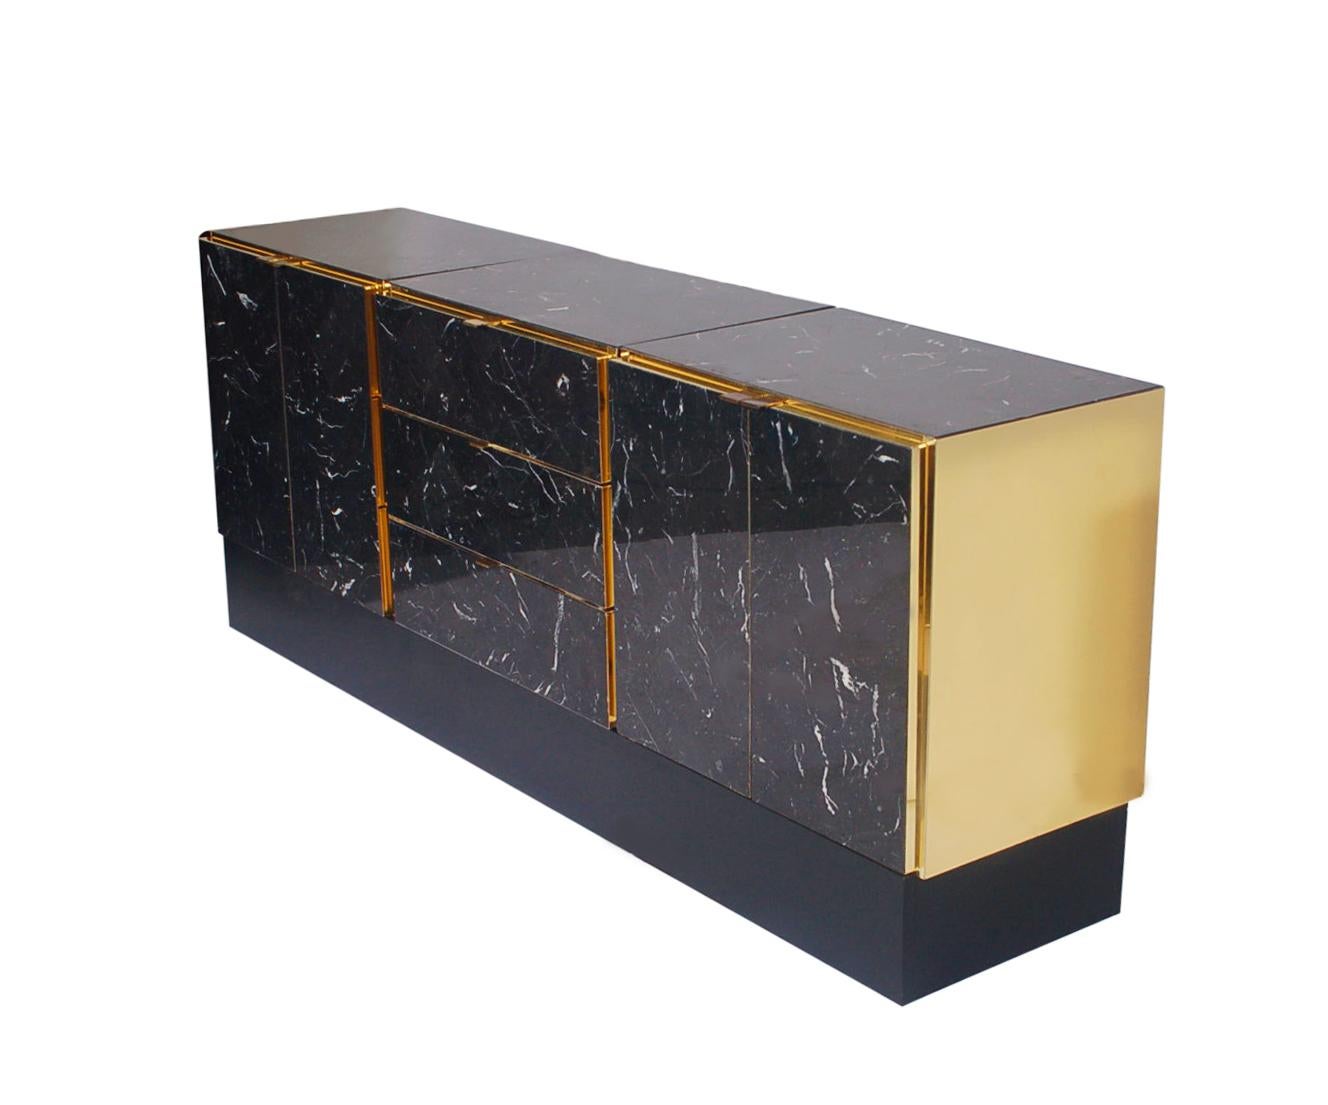 Italian Hollywood Regency Tessellated Black Marble and Brass Credenza or Cabinet by Ello